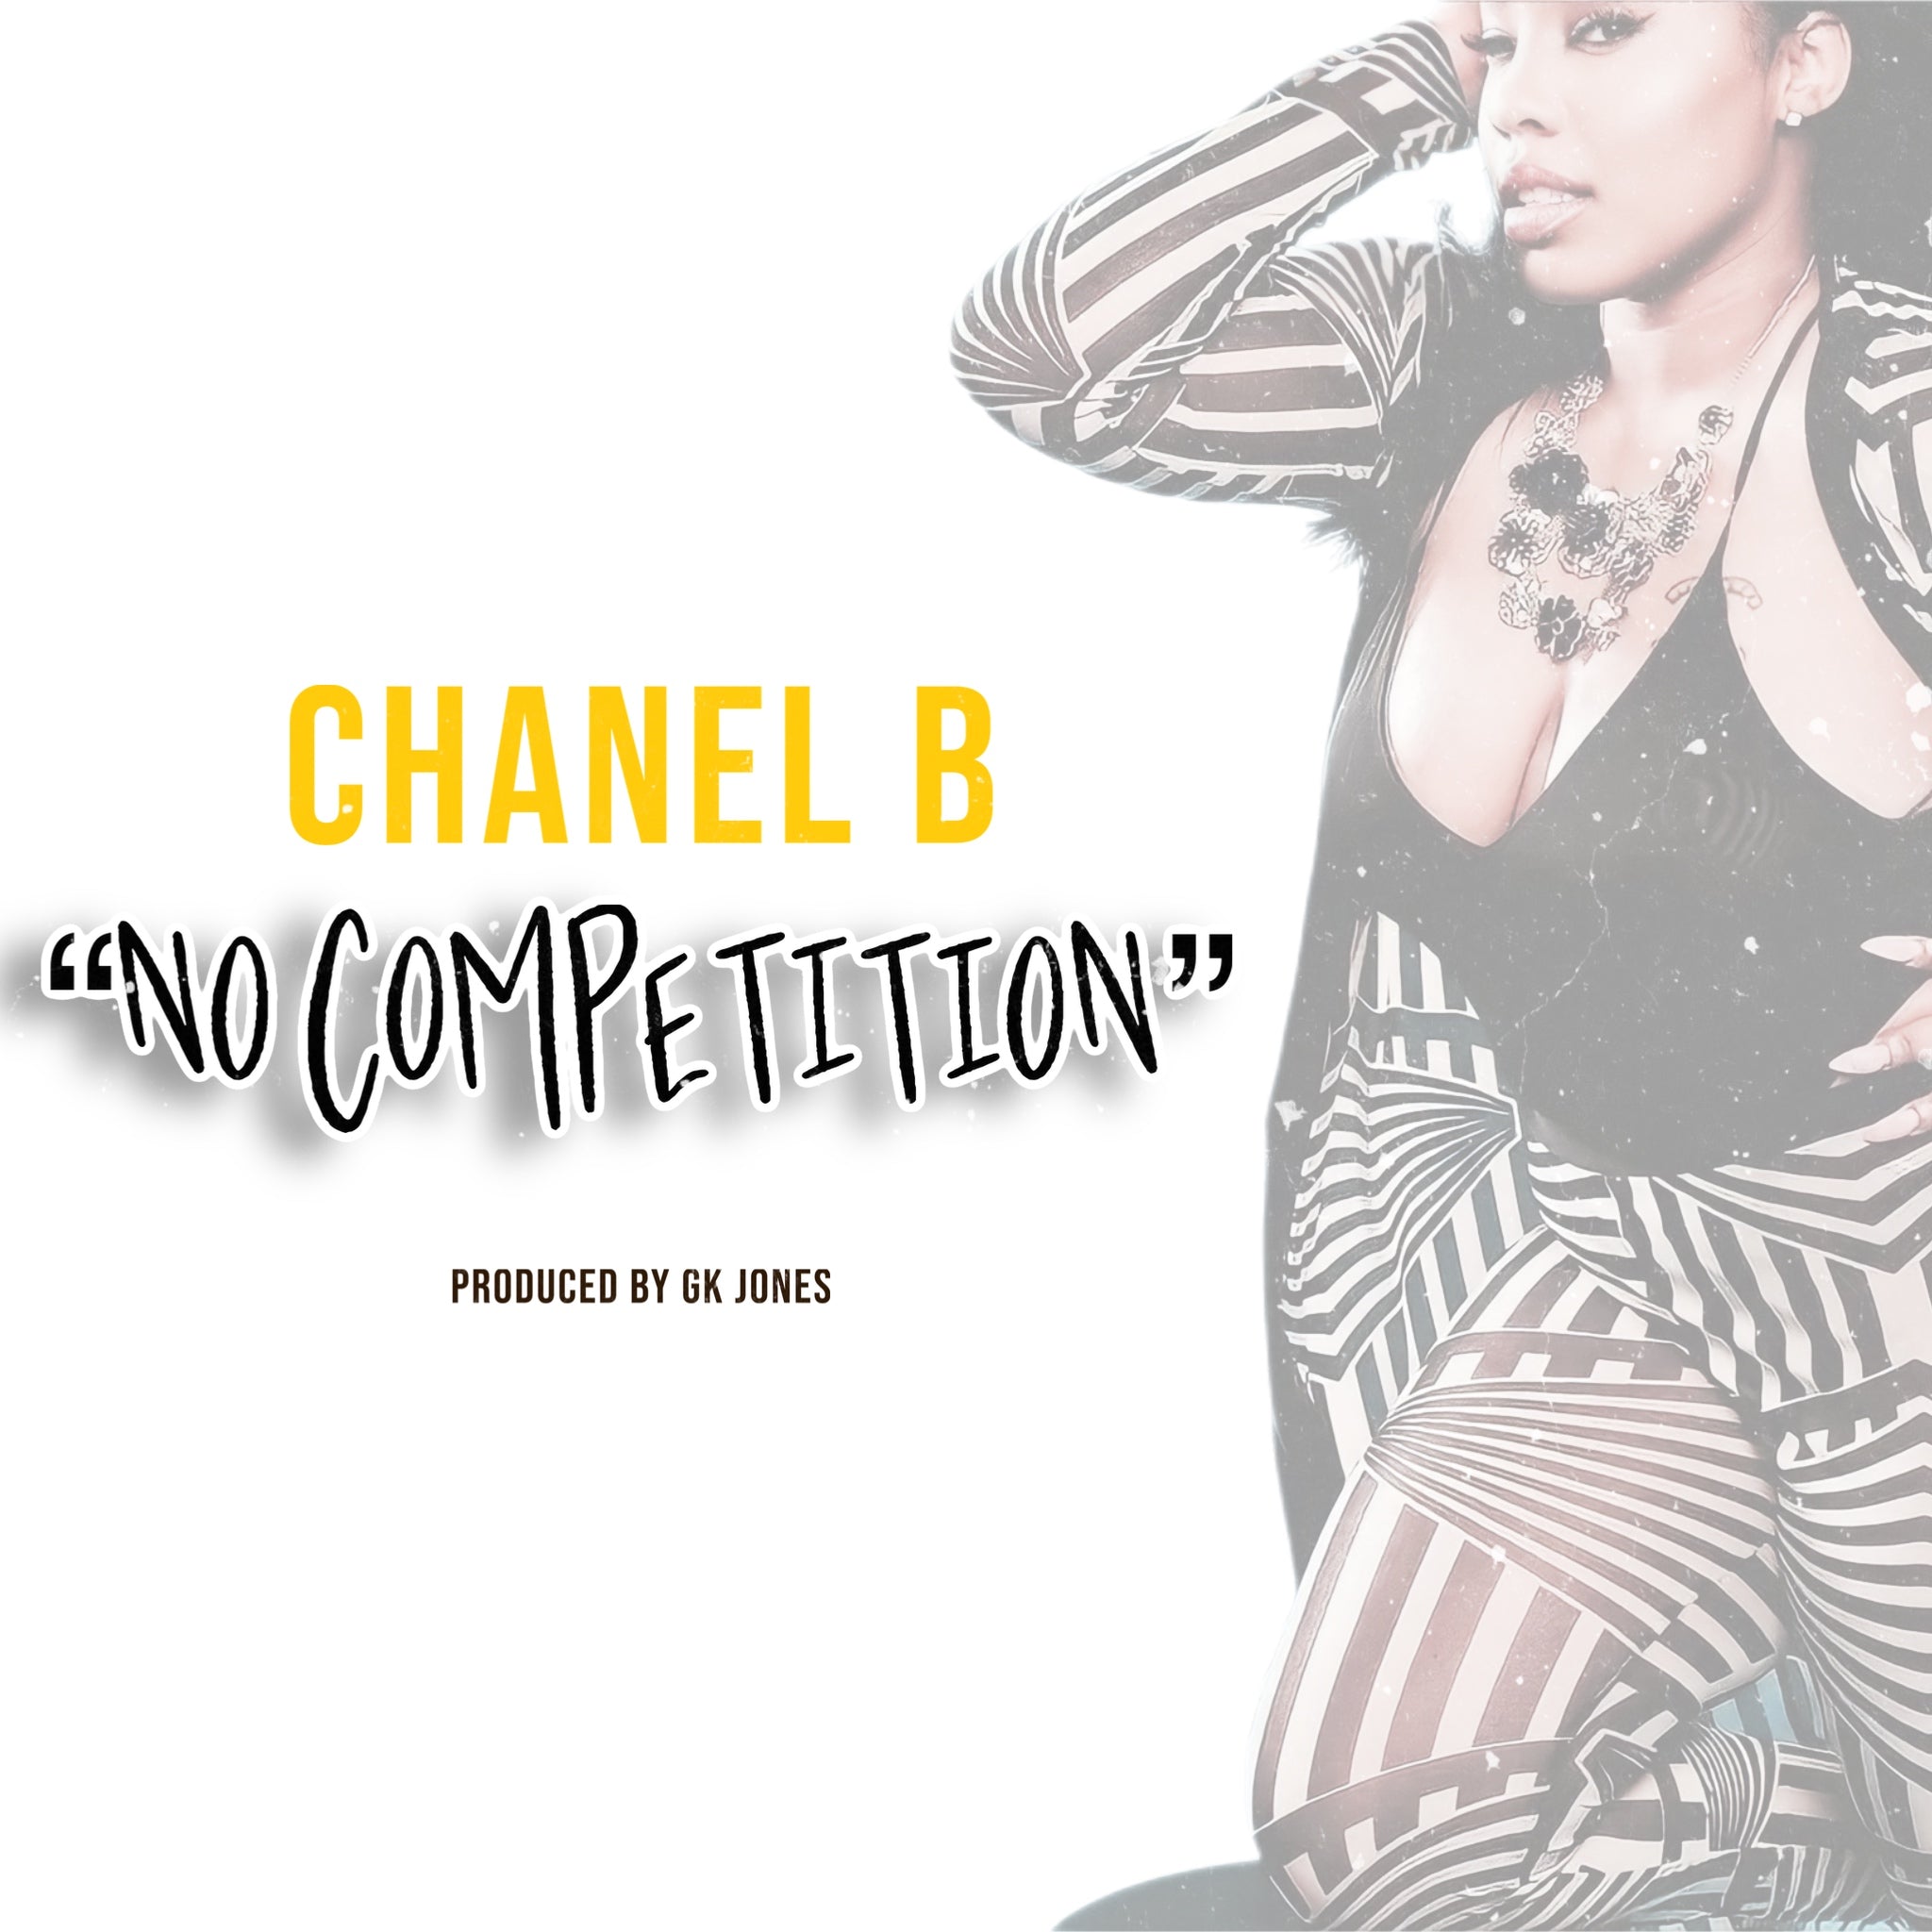 Load video: Short Music video of Chanel B.&#39;s single &quot;No Competition&quot;